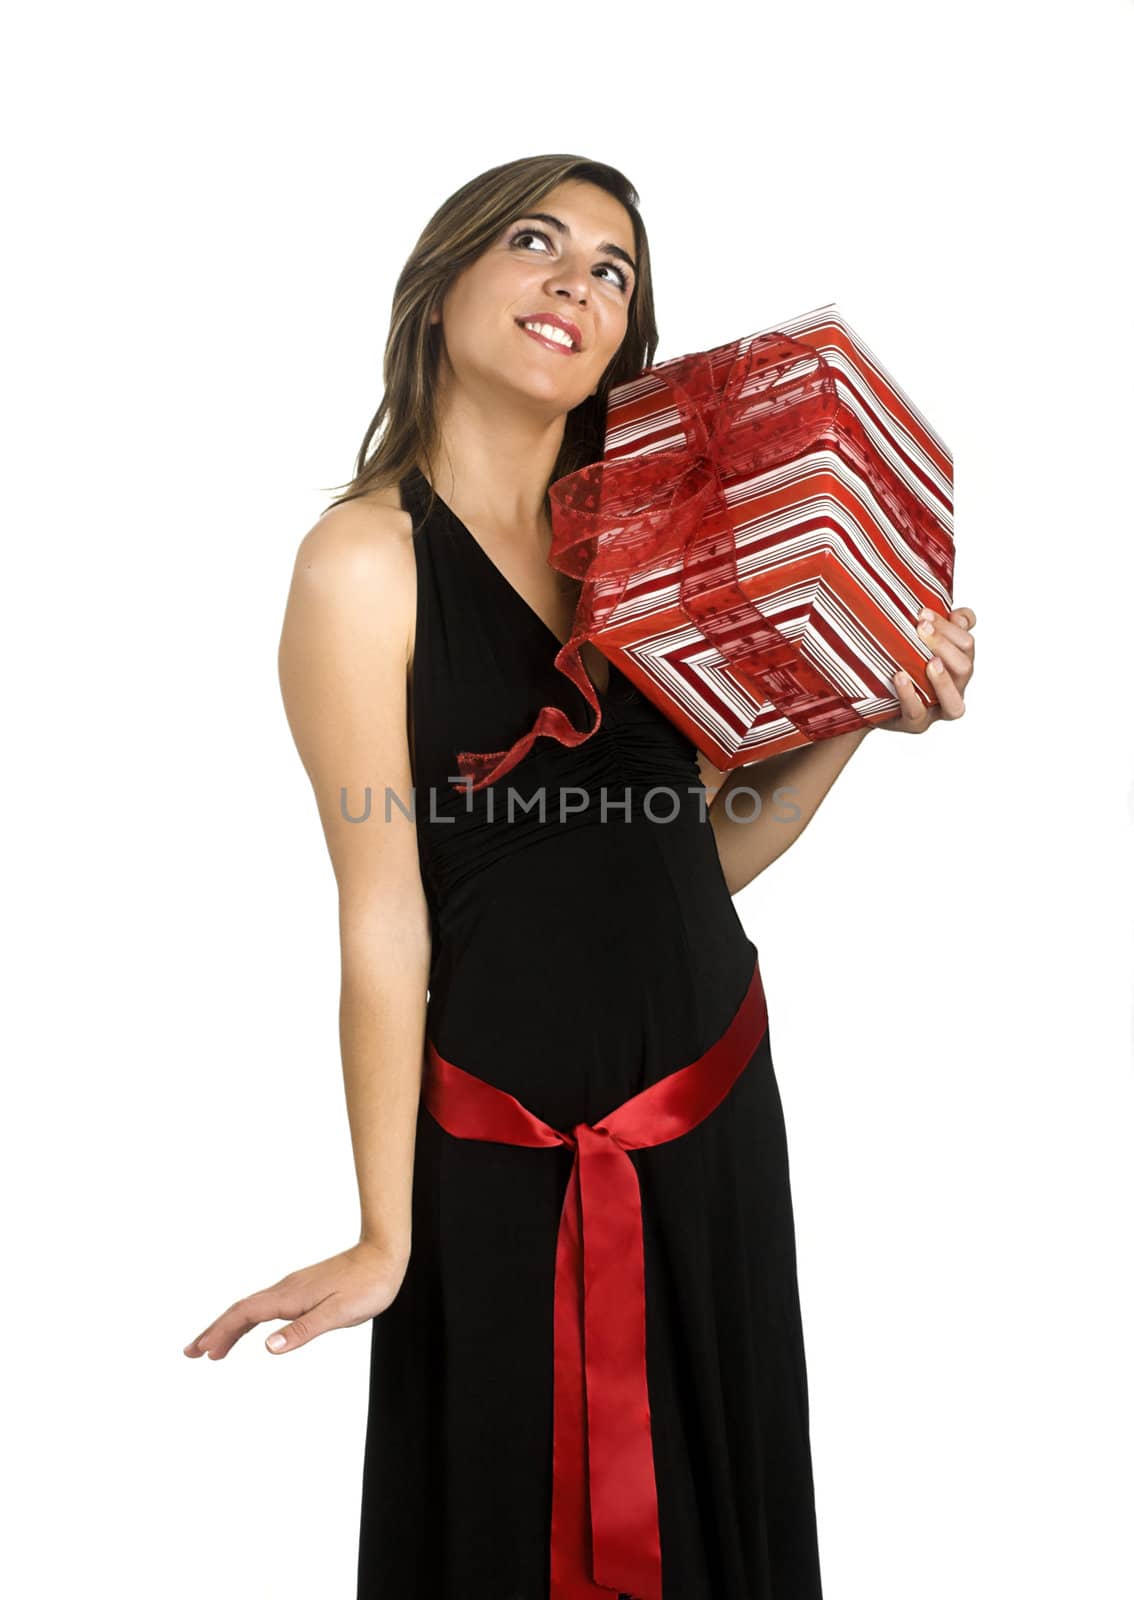 Happy woman isolated on a white background with presents.